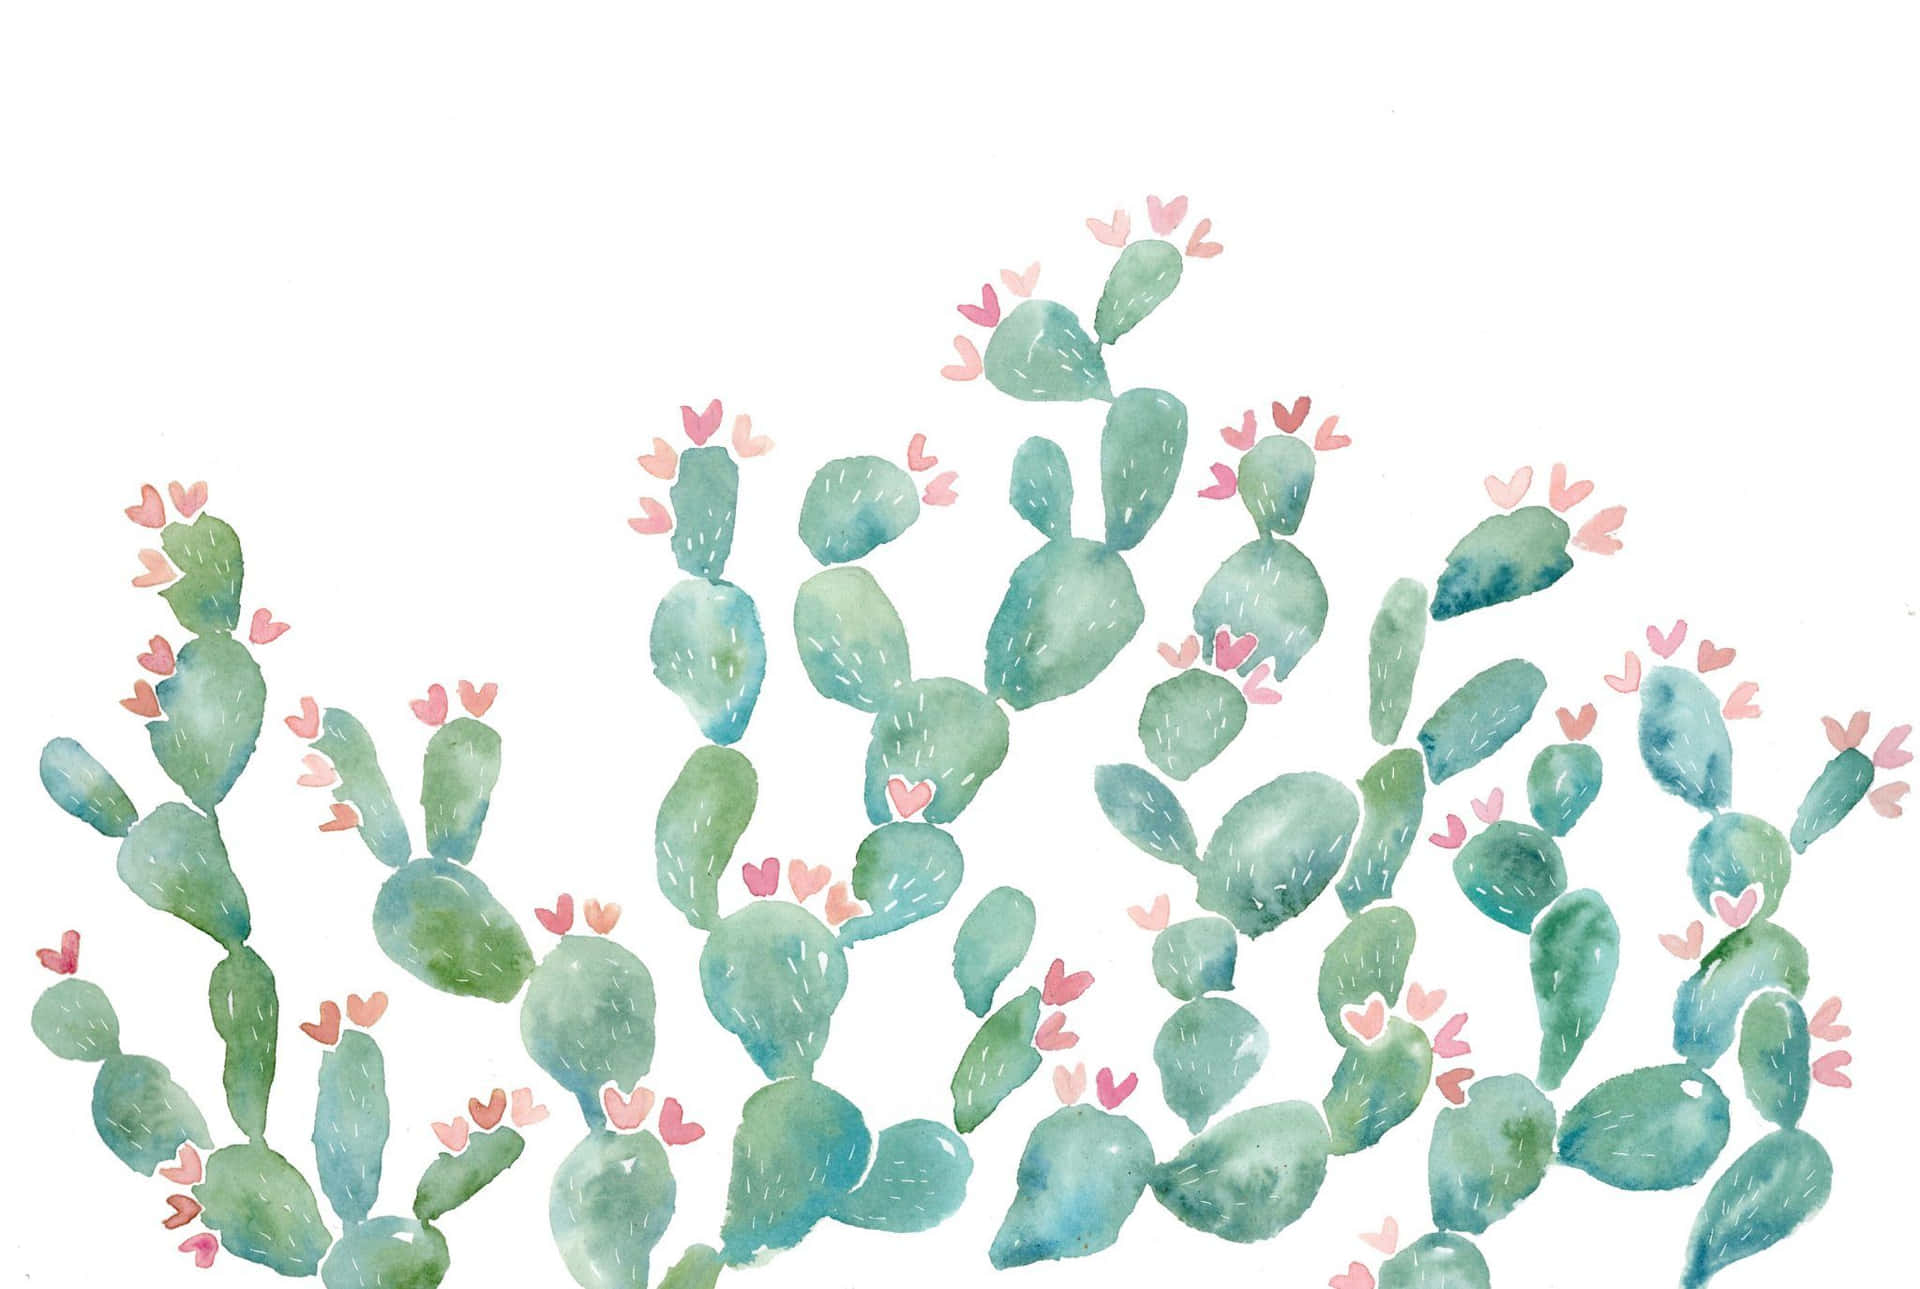 Bunny Ears Cactus Painting Picture